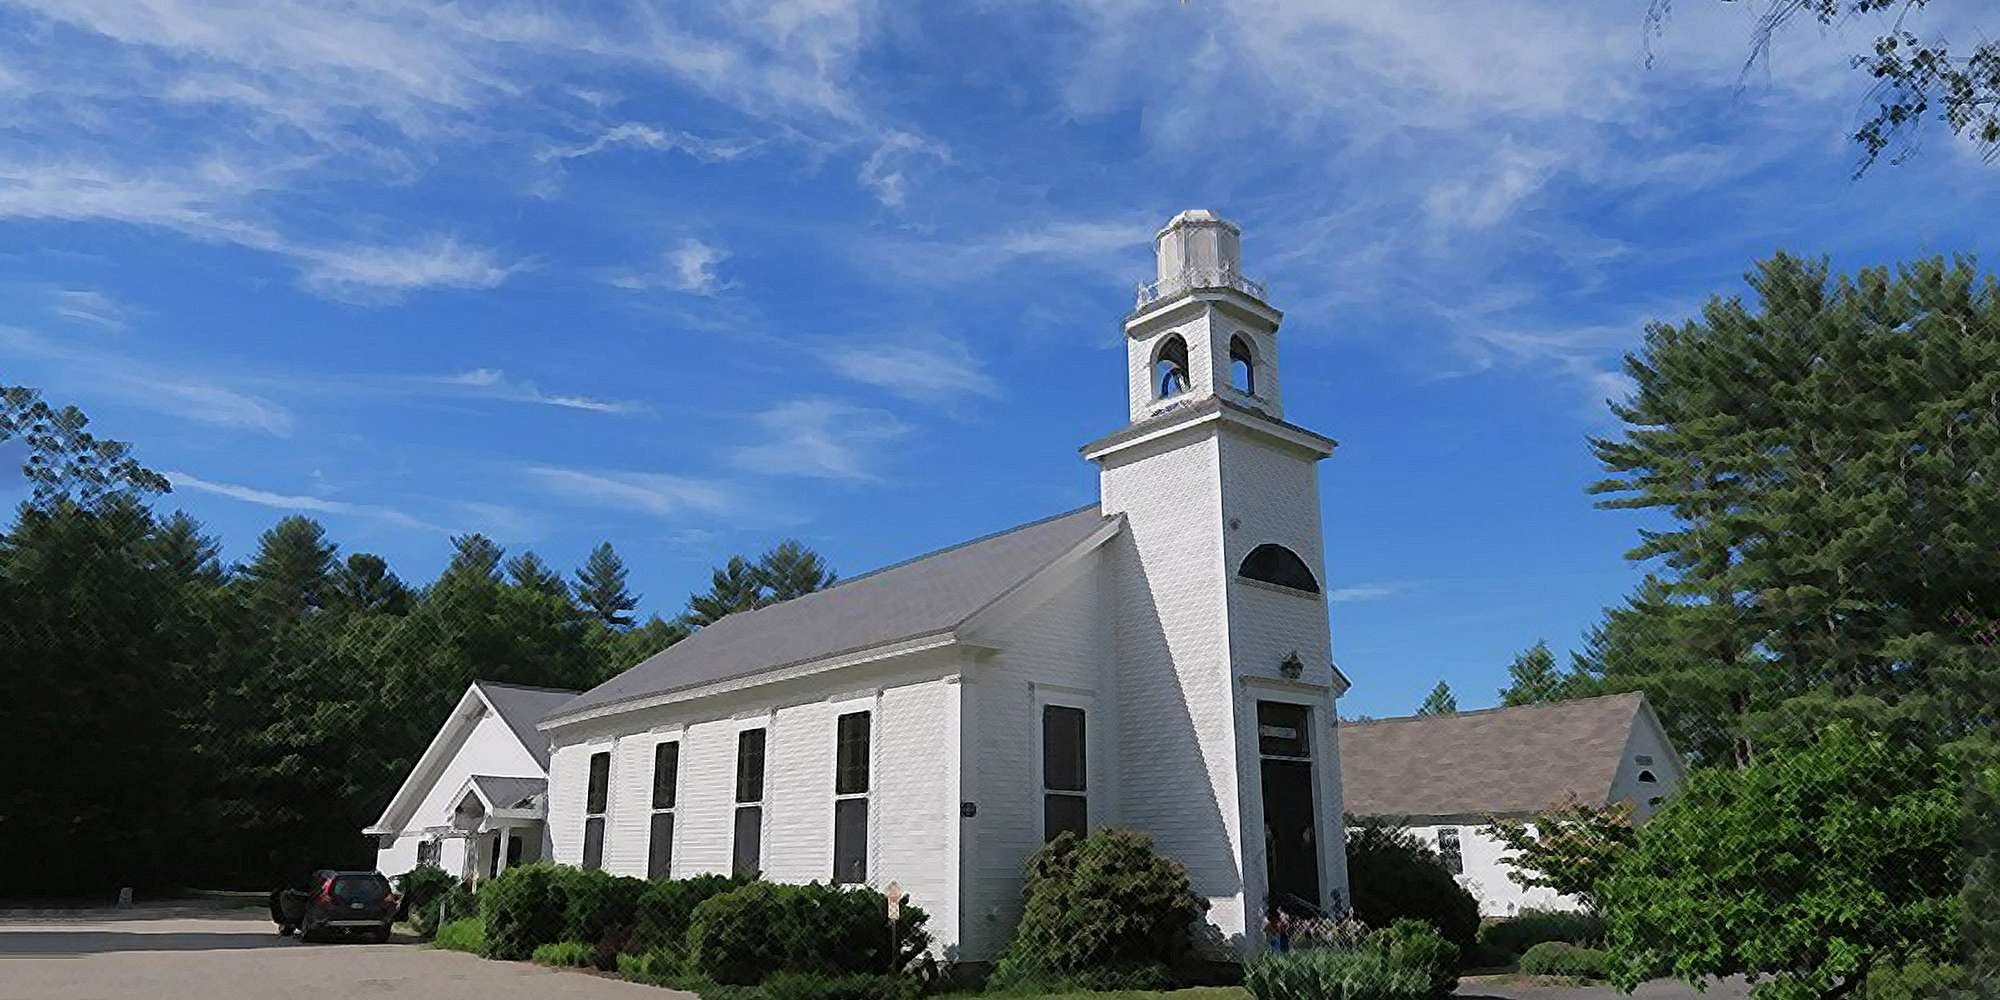 A Photo of the First Congregational Church in Marlborough, New Hampshire